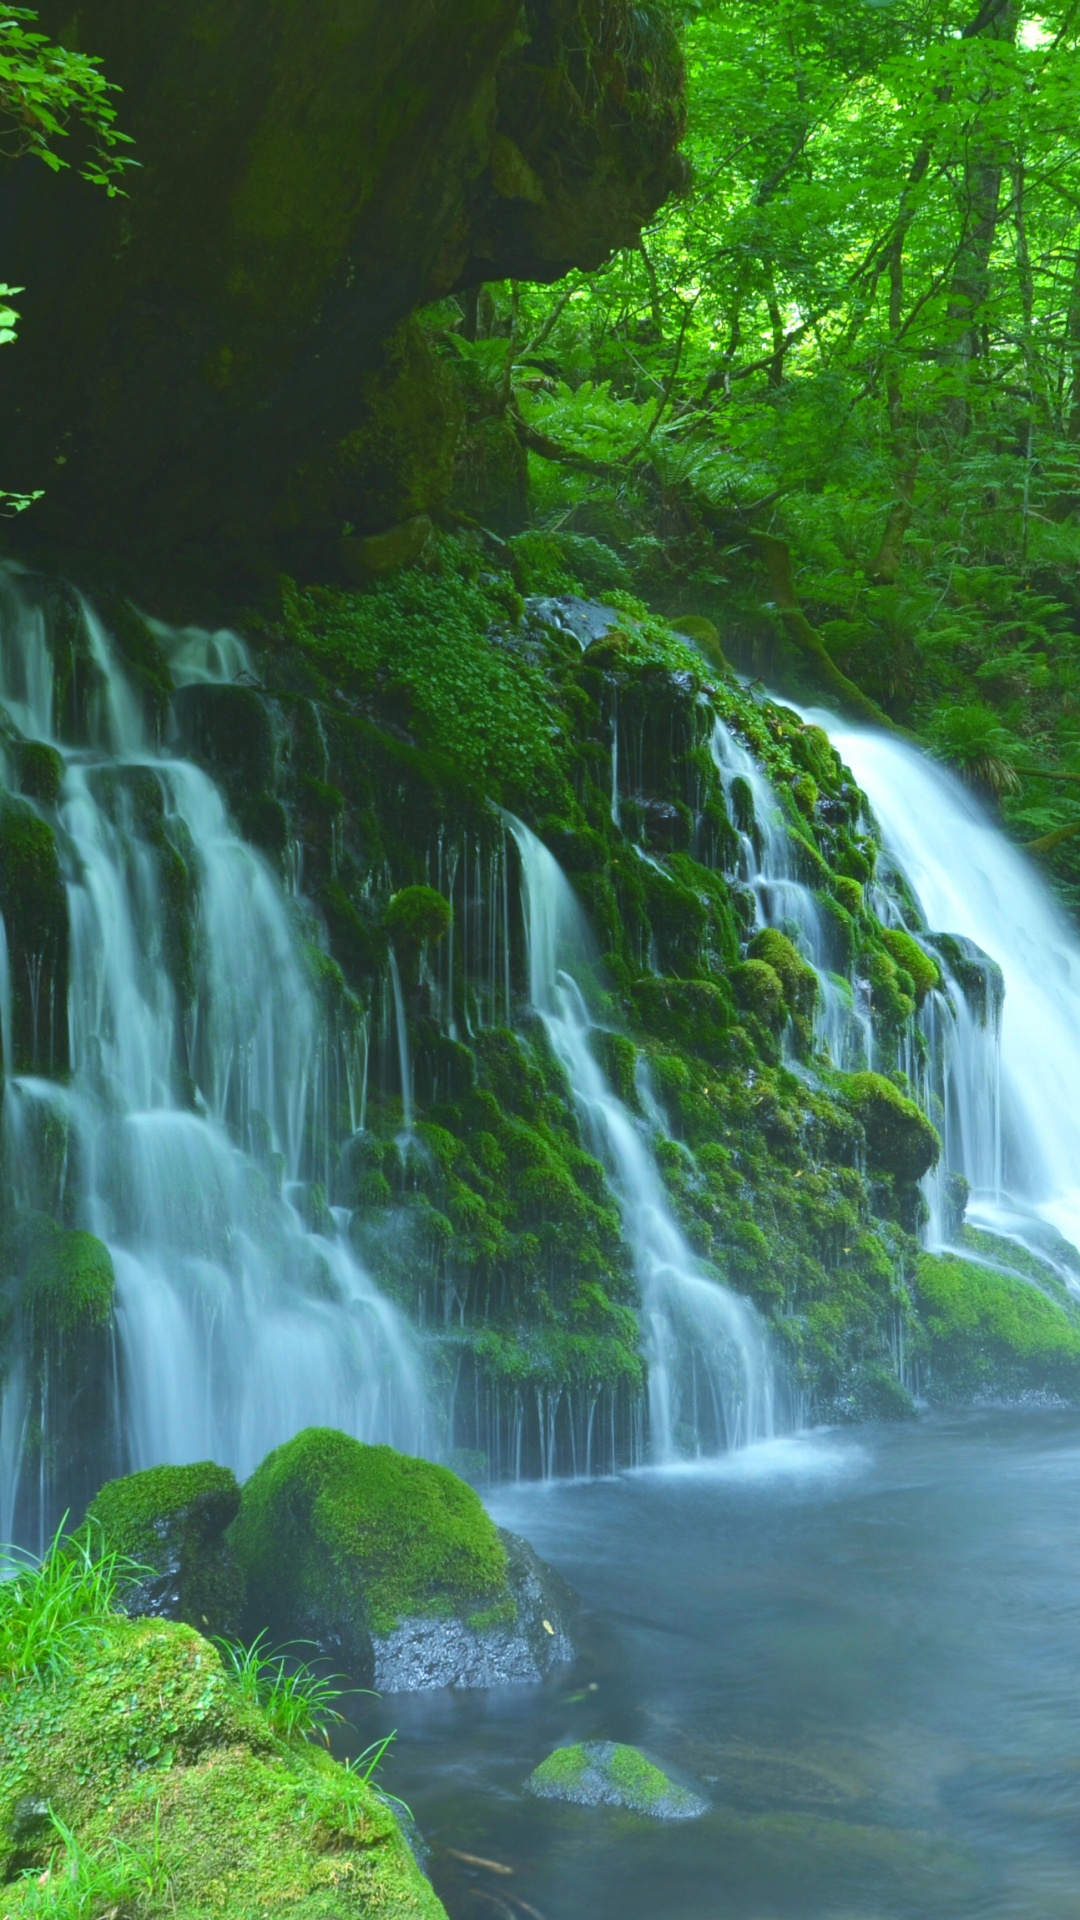 Water Falls in The Middle of Green Trees. Wallpaper in 1080x1920 Resolution